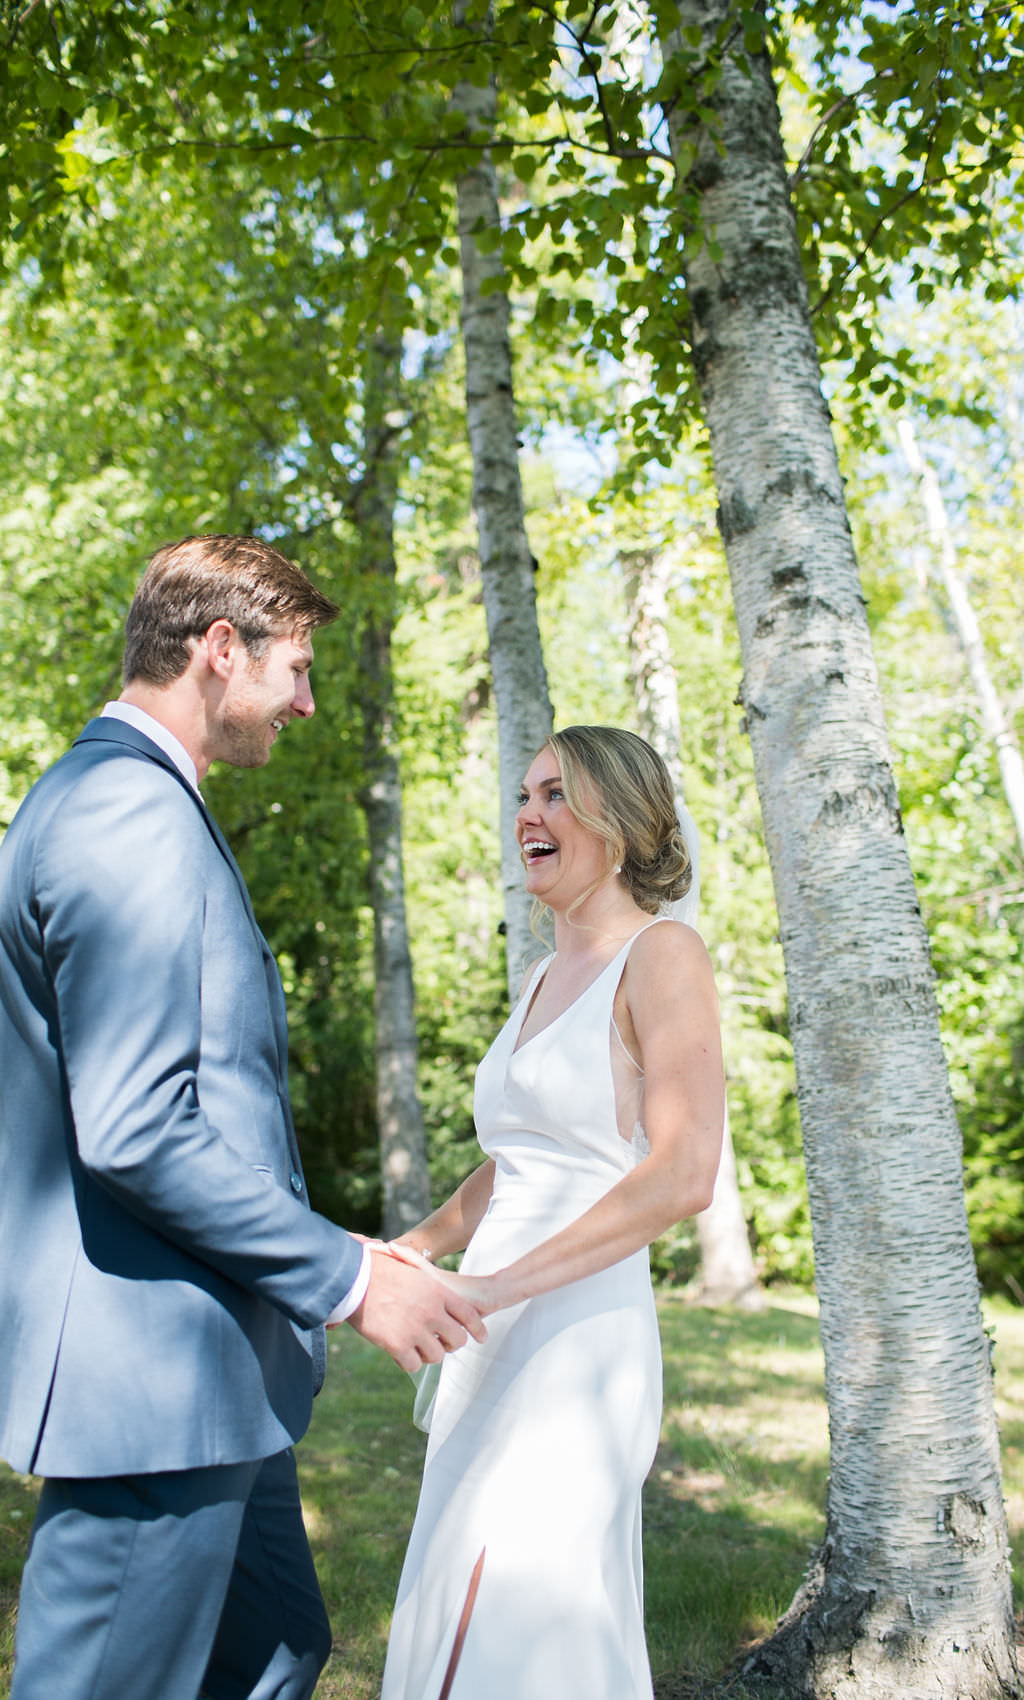 Bride and groom smiling at each other at a Montana wedding venue